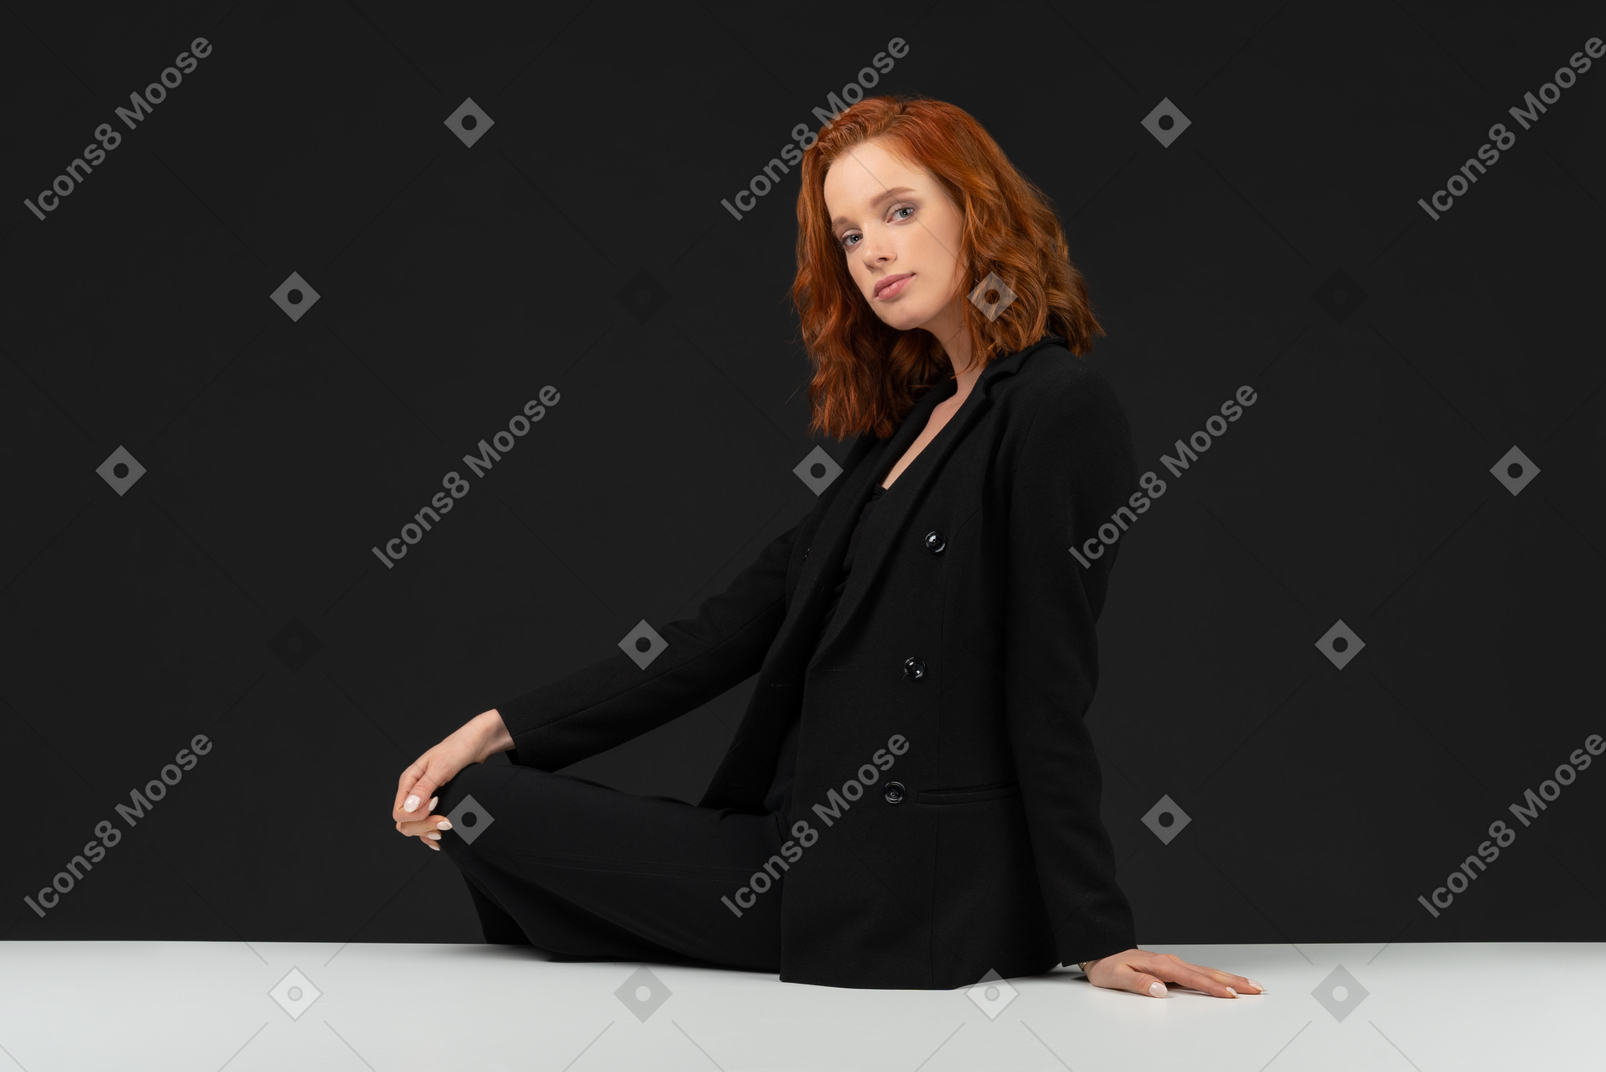 A side view of the beautiful woman sitting on the table and holding her hand on knee